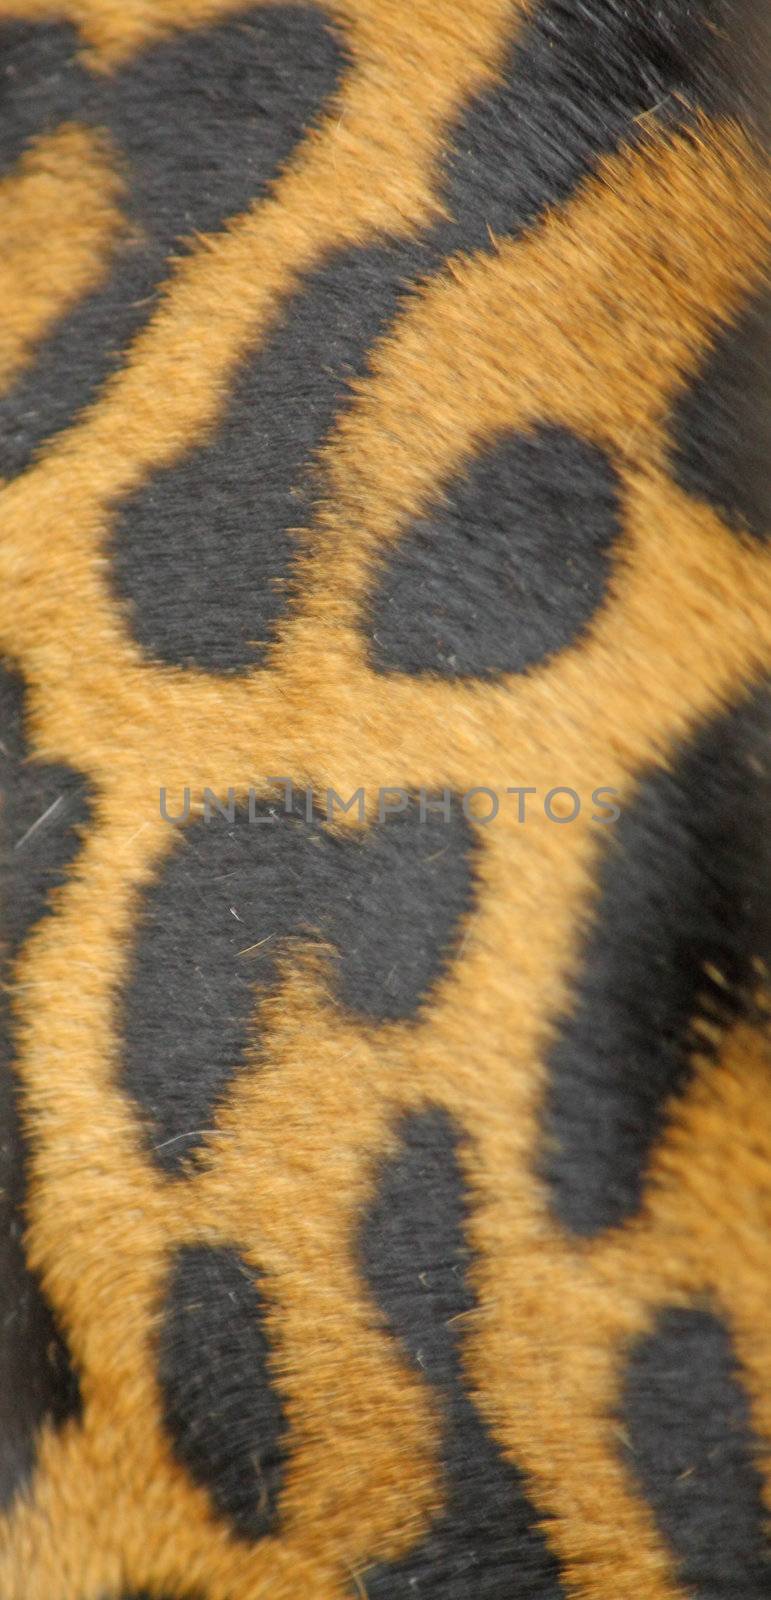 Close up of the leopard skin for the background.